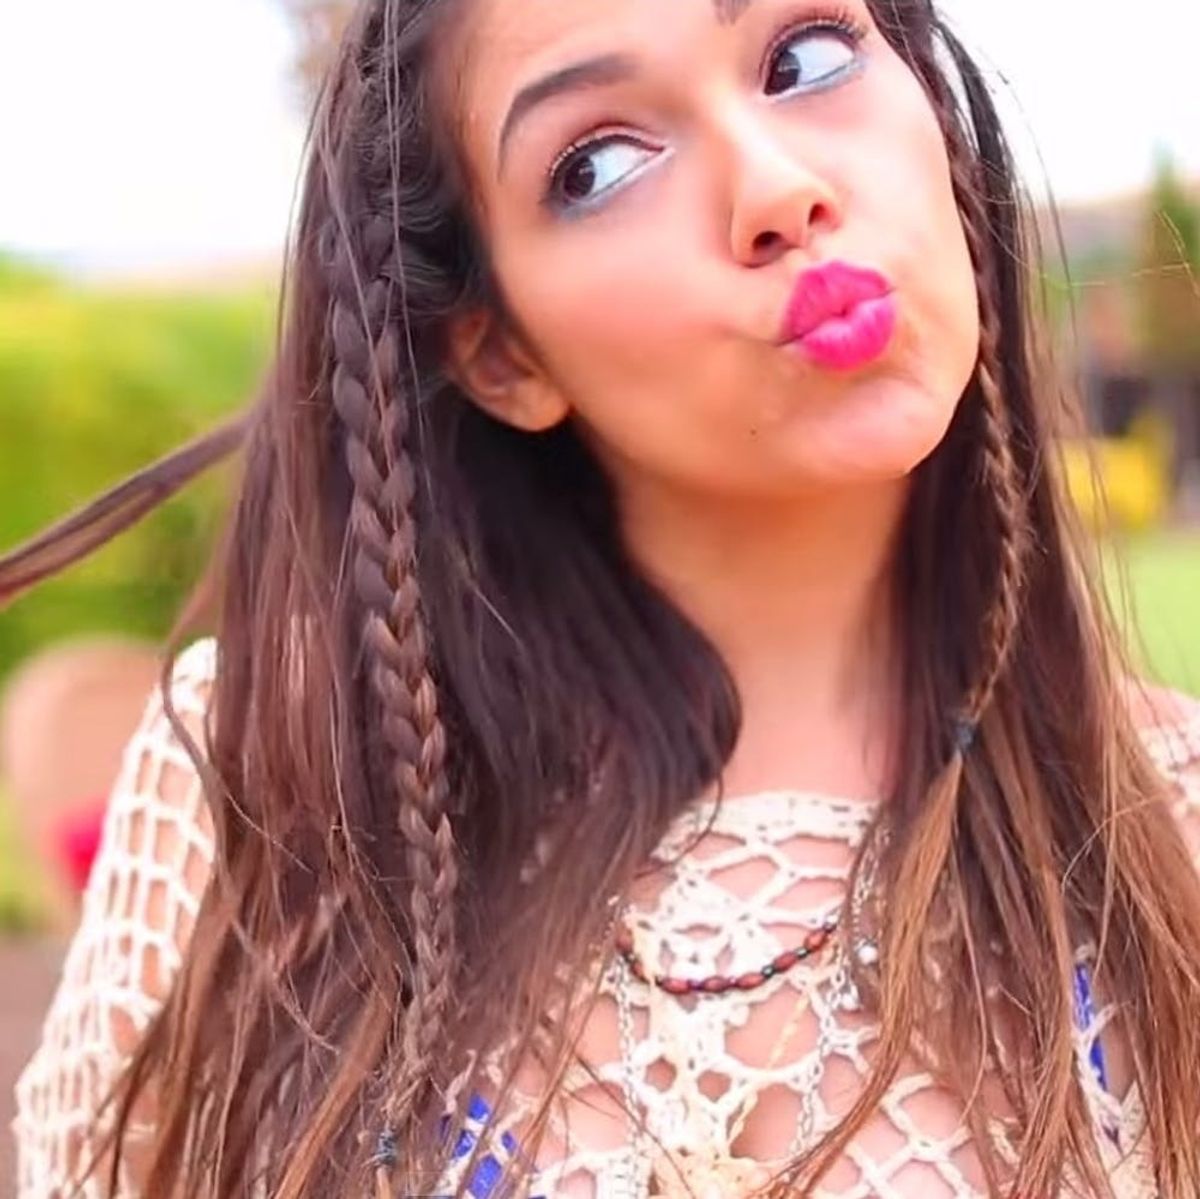 WATCH: 13 Easy Hair Tutorials for Every Summer Activity